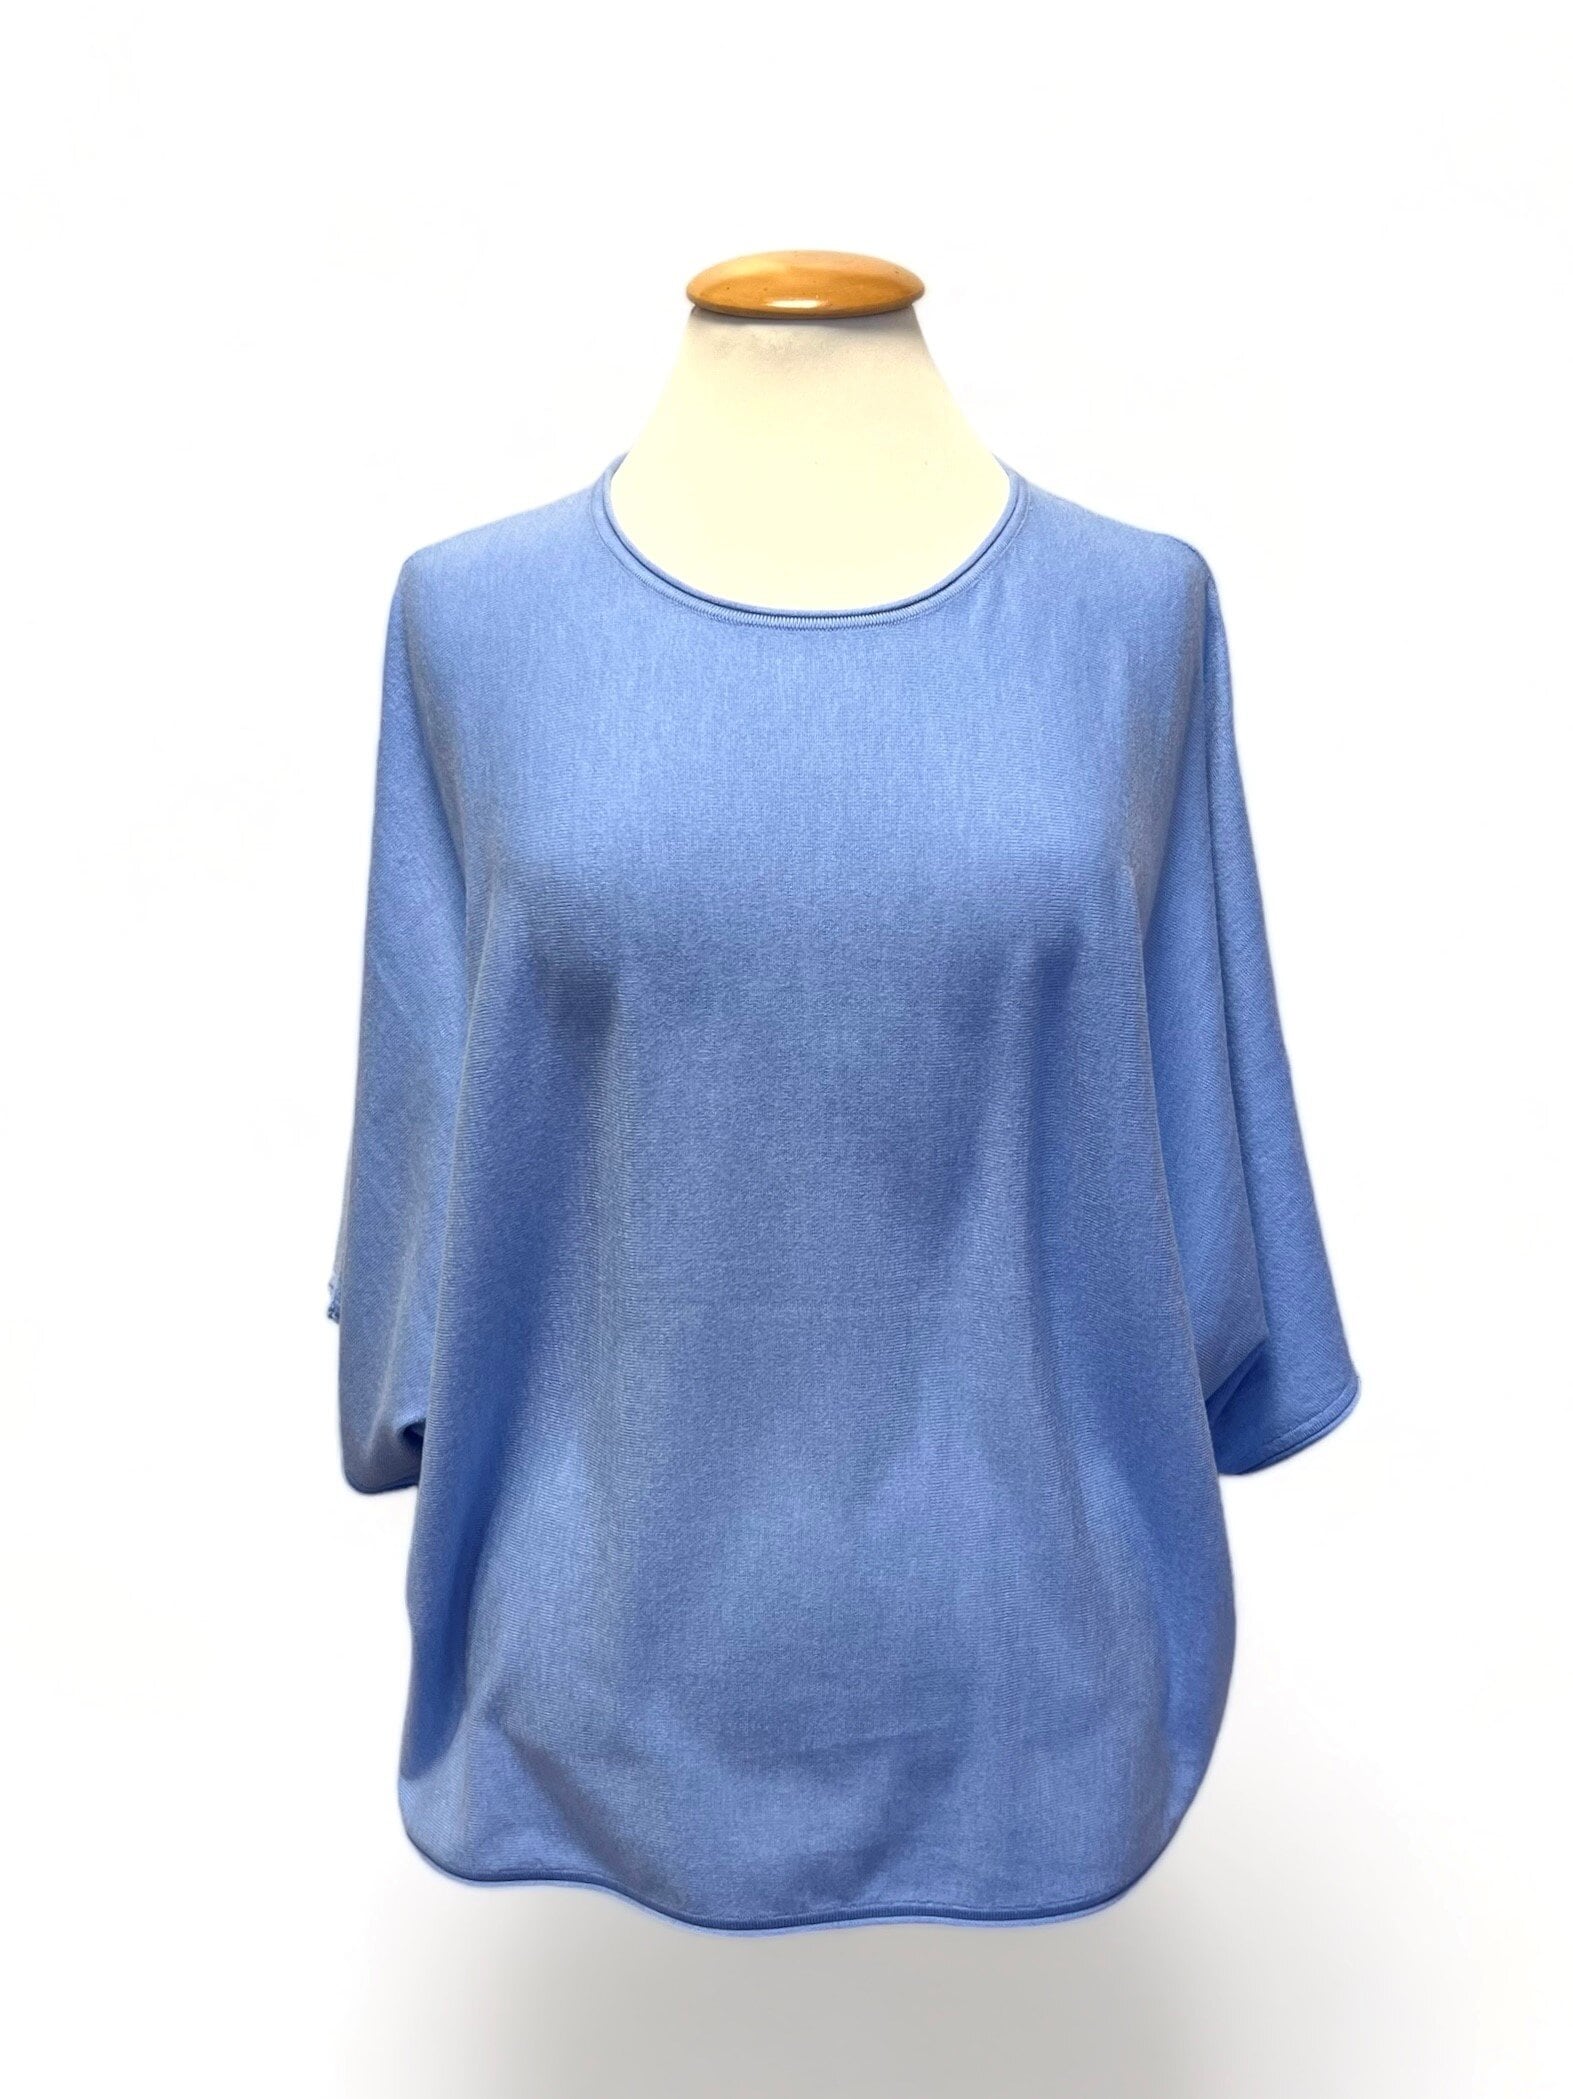 Mary Poncho Sweater - Blue